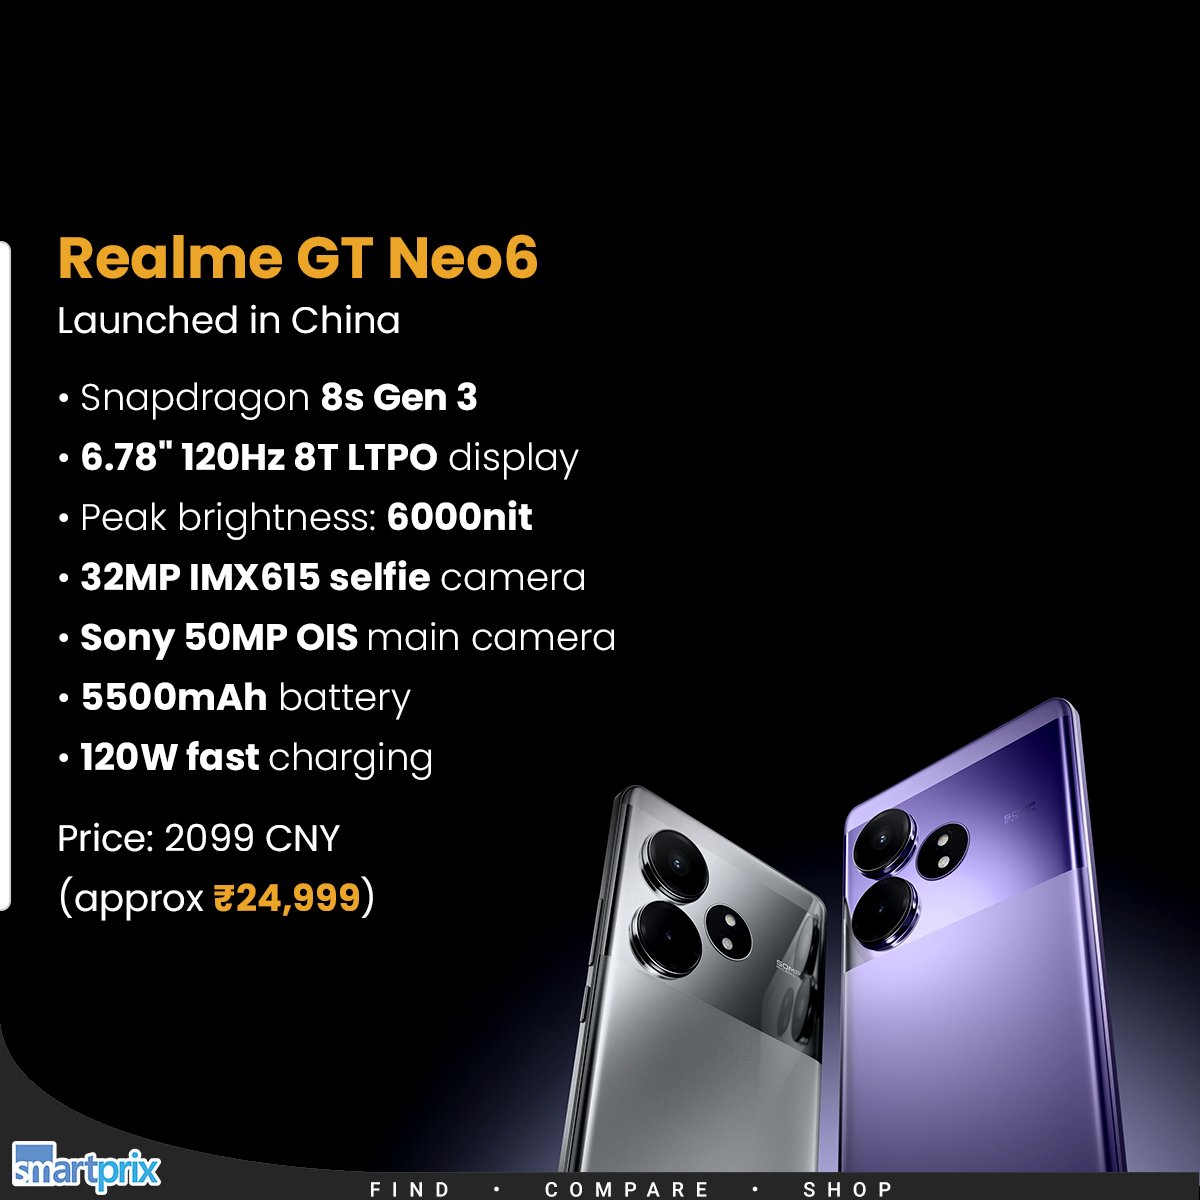 Realme GT Neo6 launched in China with Snapdragon 8s Gen 3 chipset #realme #realmeGTNeo6 #Snapdragon8sGen3